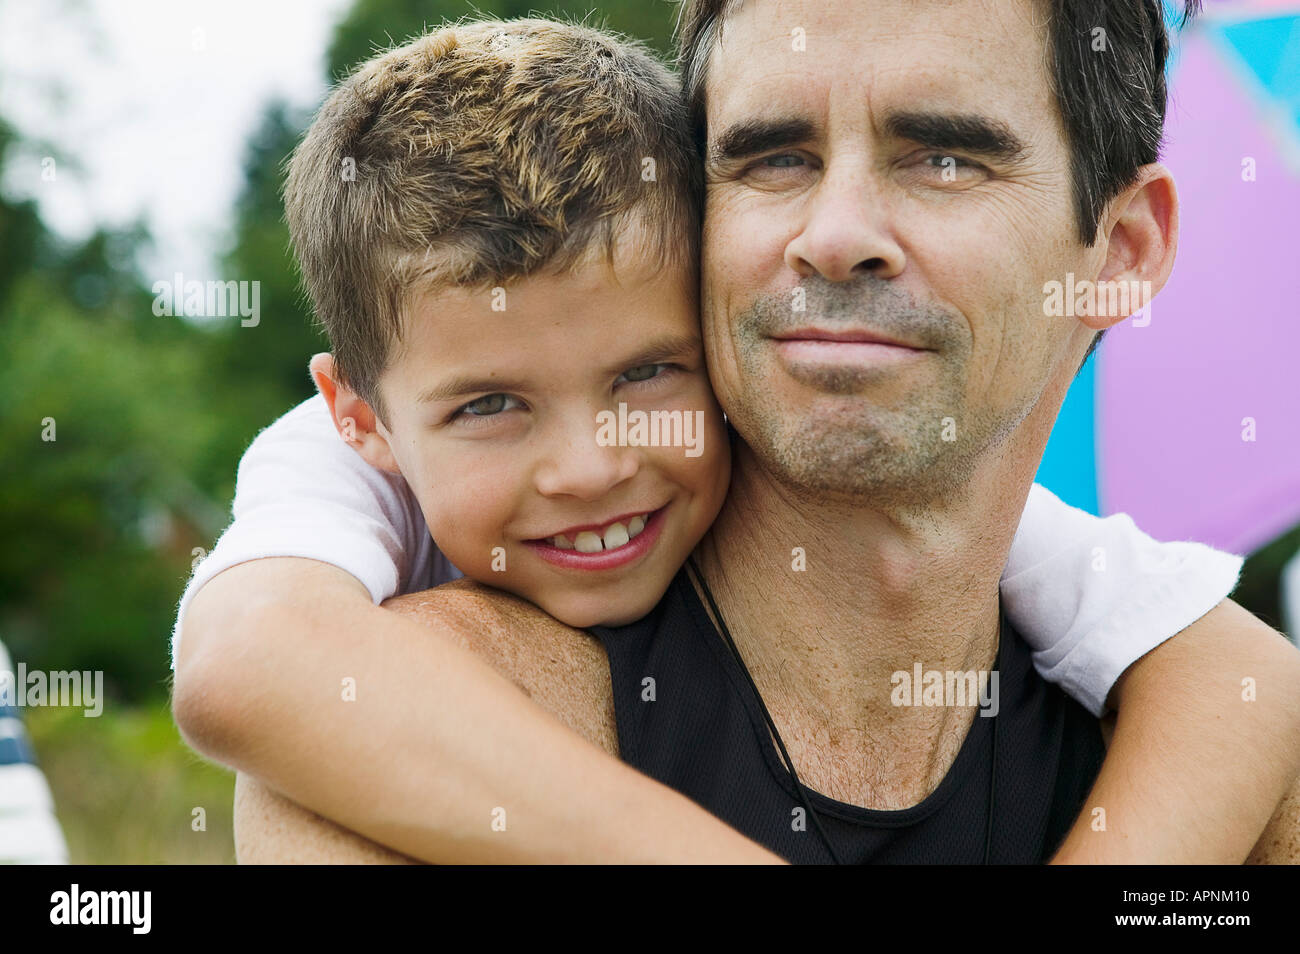 Portrait of father and young boy Stock Photo